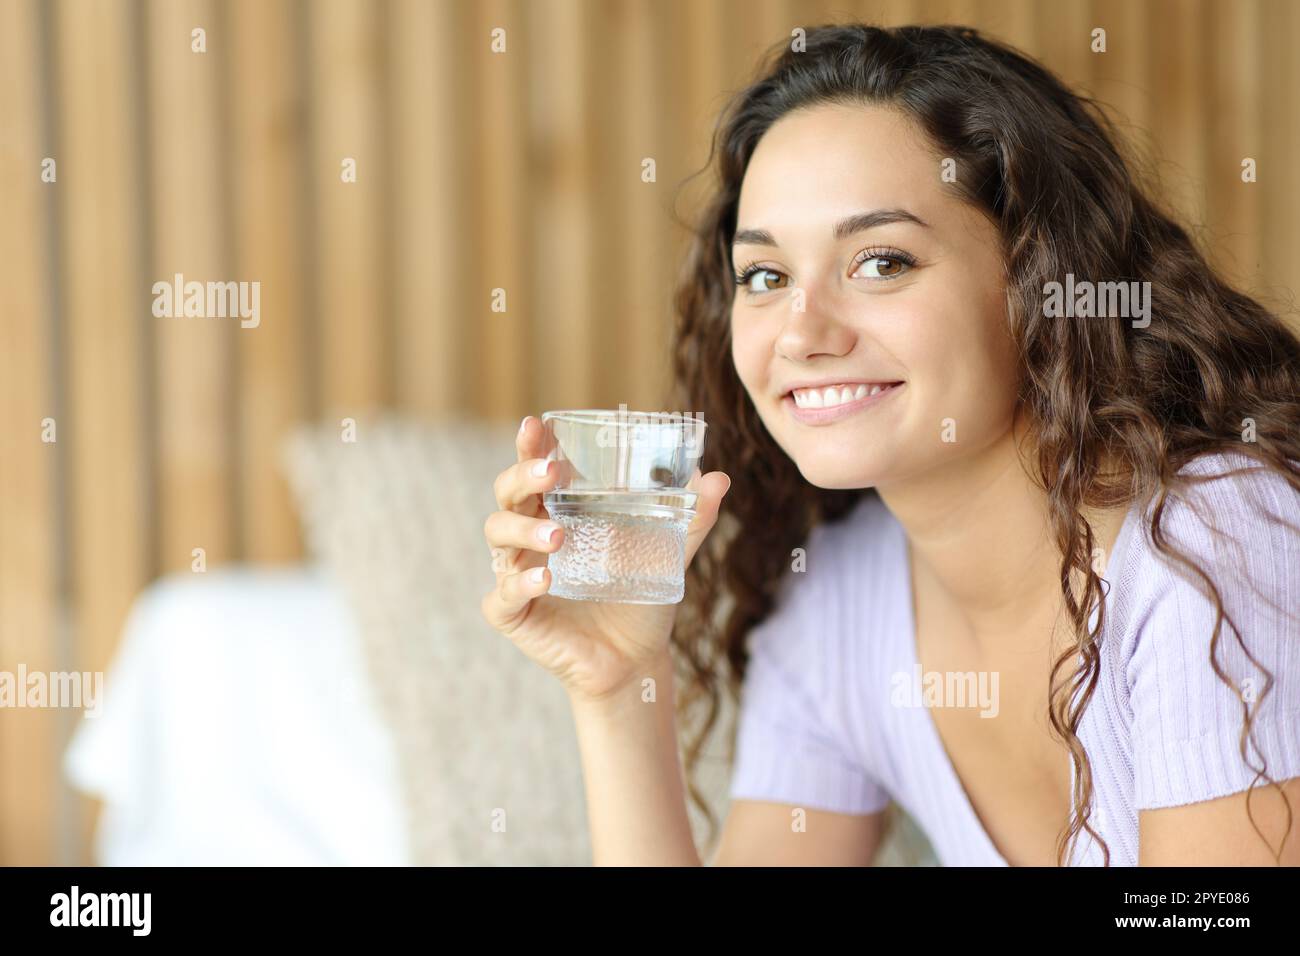 Happy woman holding water glass looks at you Stock Photo